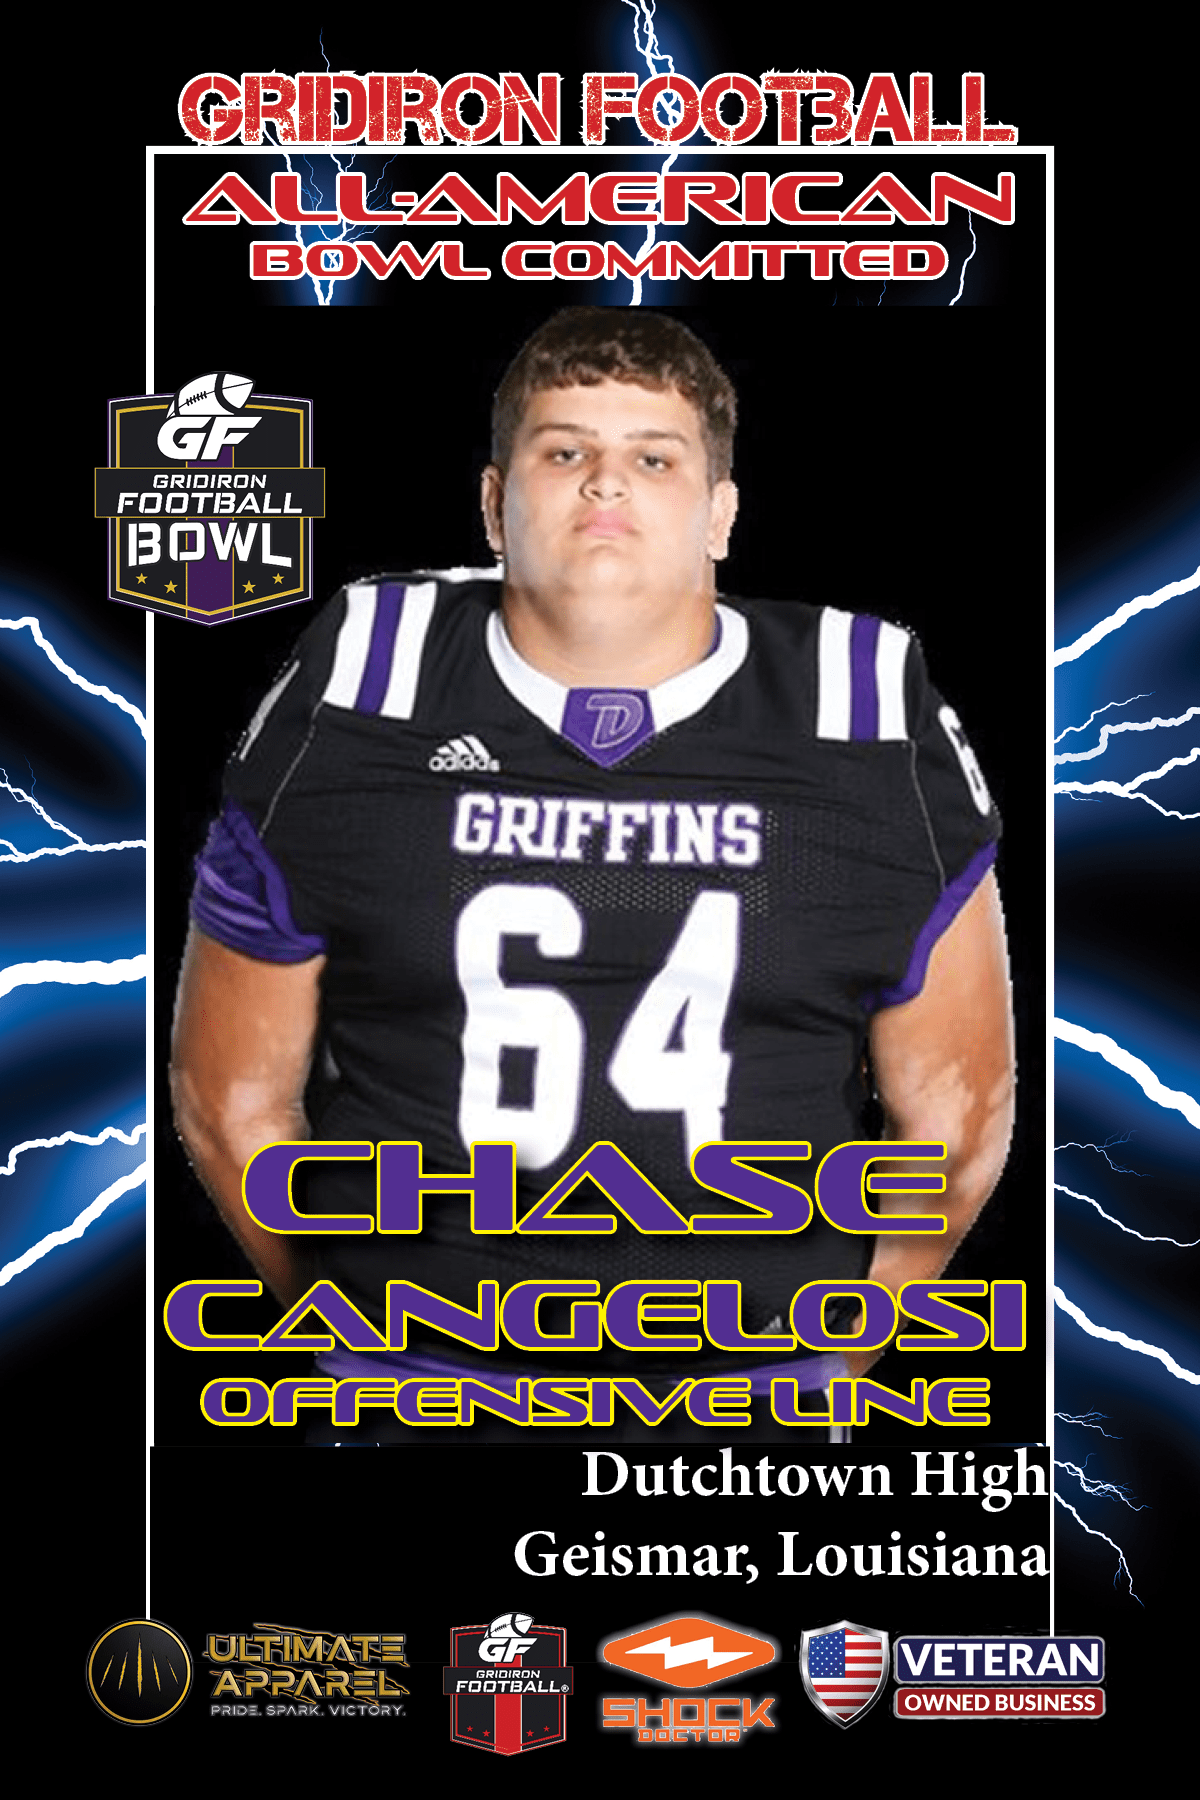 BREAKING NEWS: Dutchtown (La.) OL Chase Cangelosi has committed to play in the 2023 Gridiron Football All-American Bowl